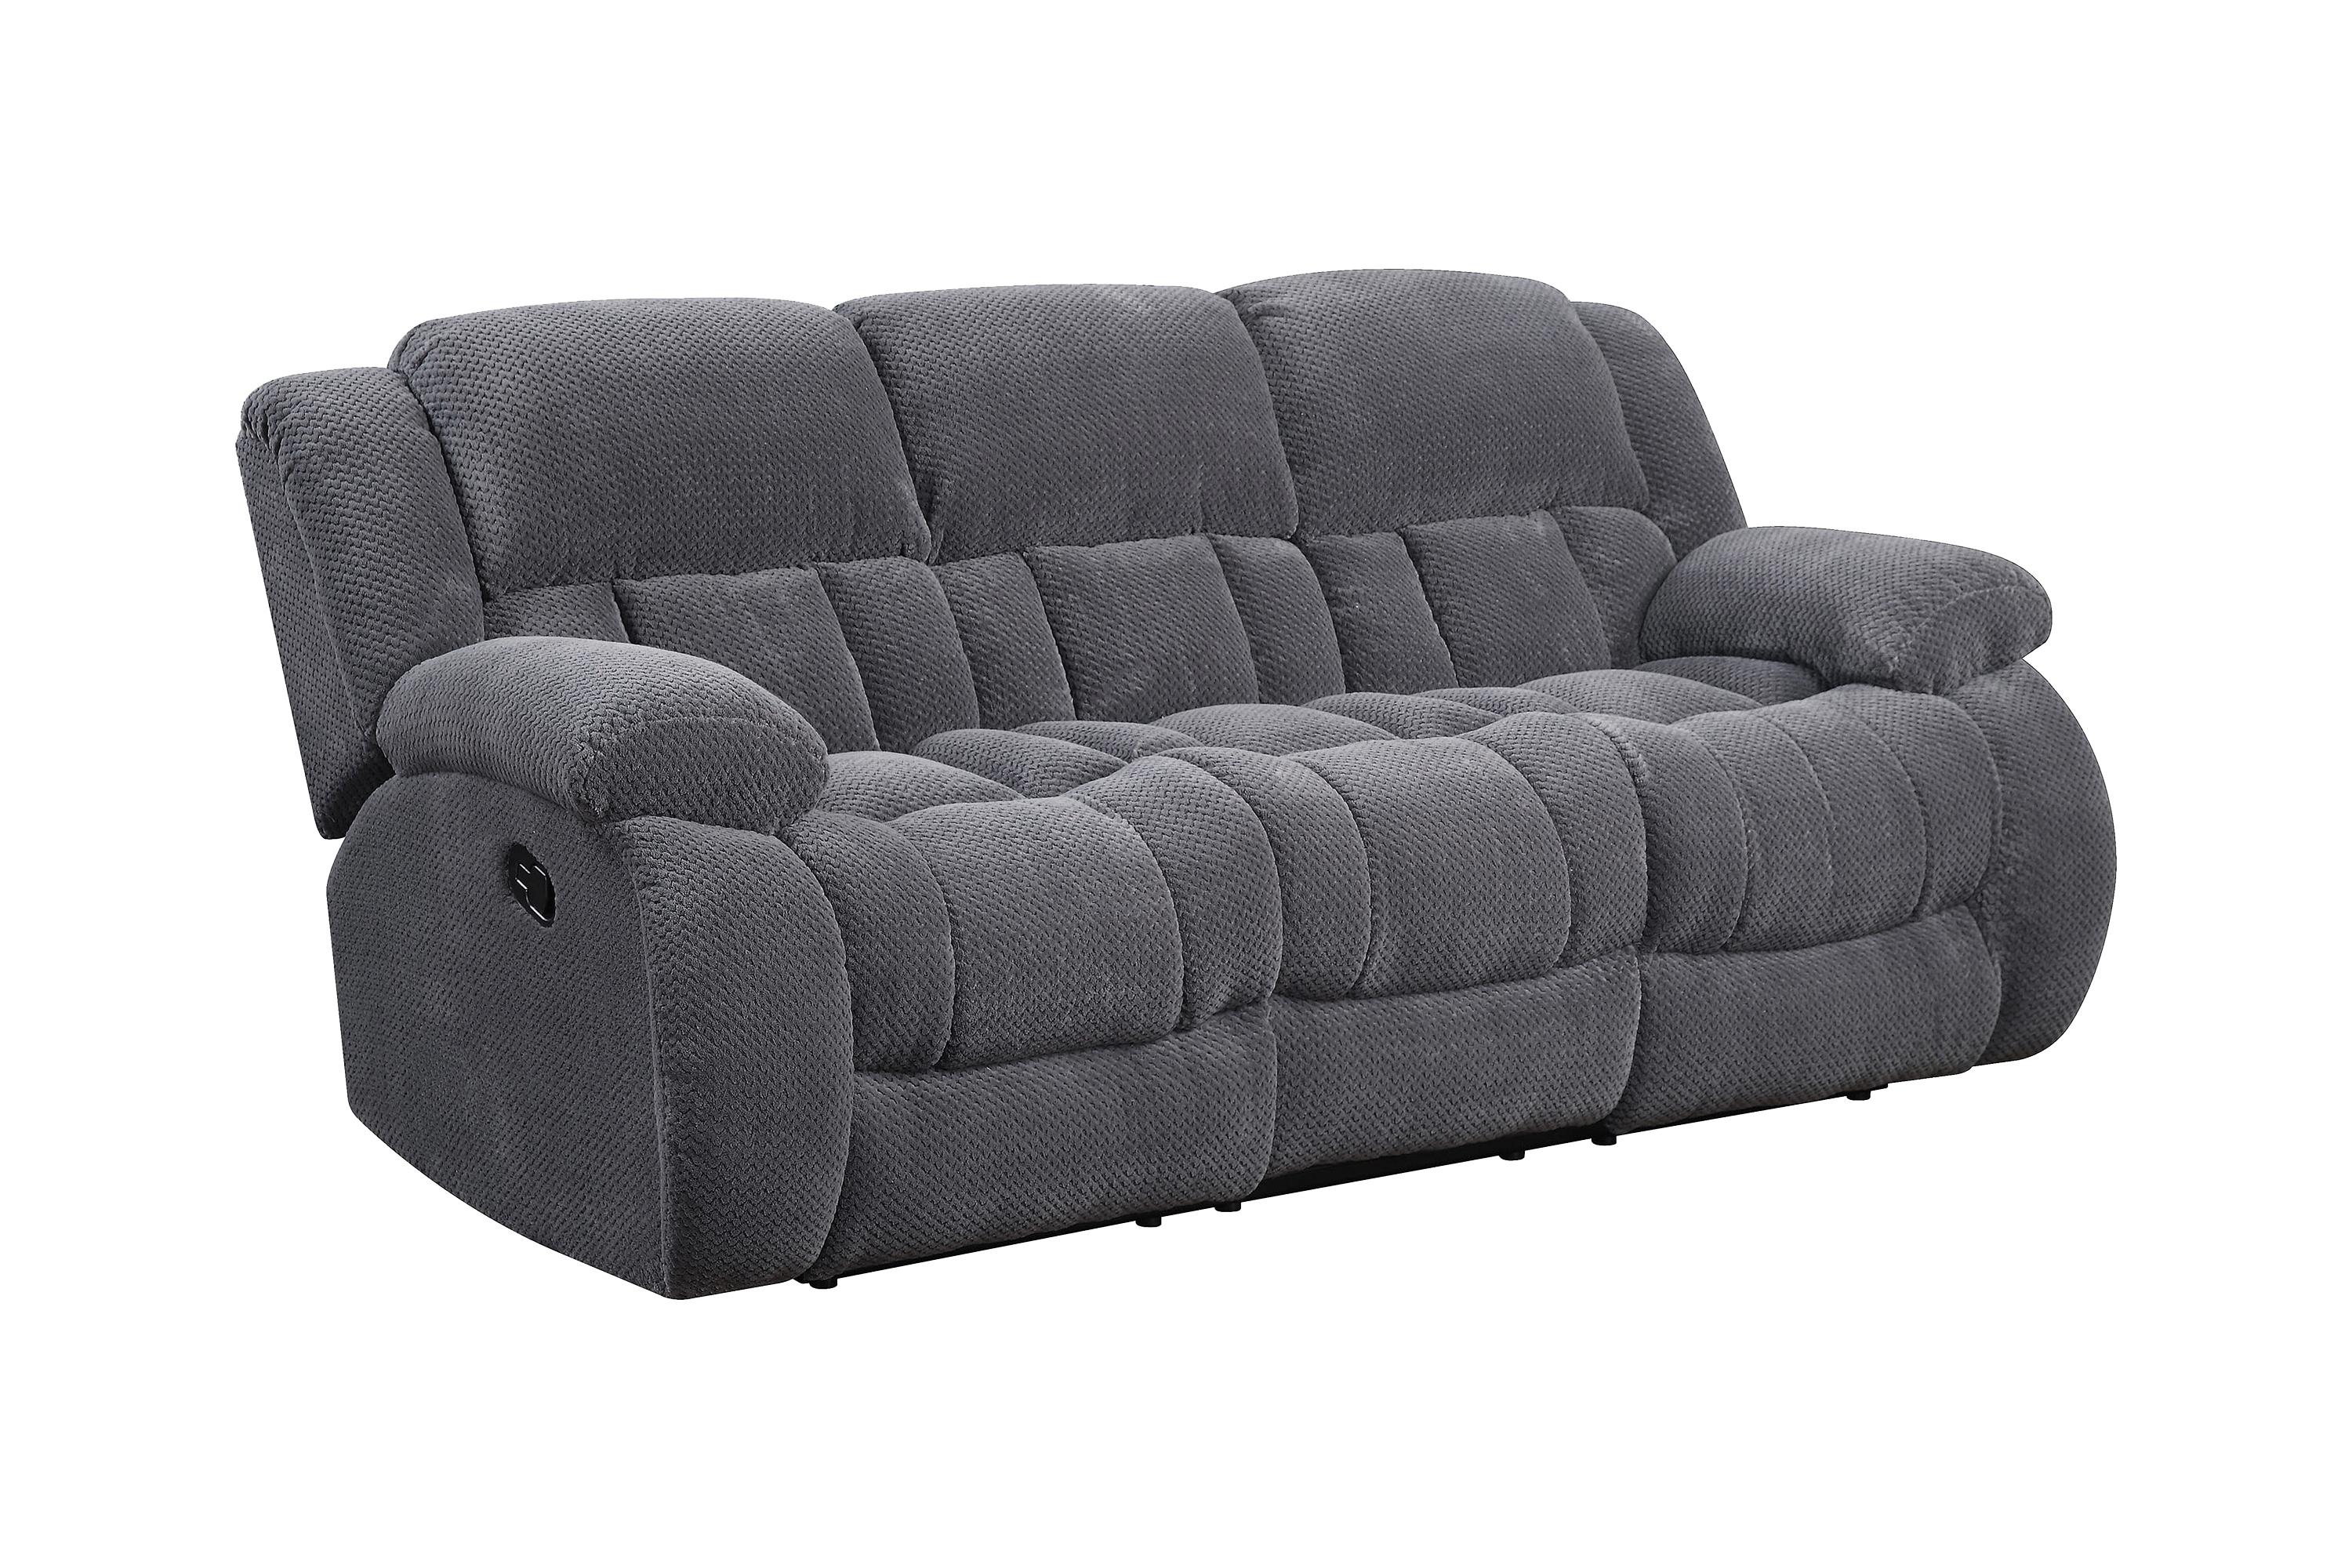 Contemporary Motion Sofa 601921 Weissman 601921 in Charcoal 